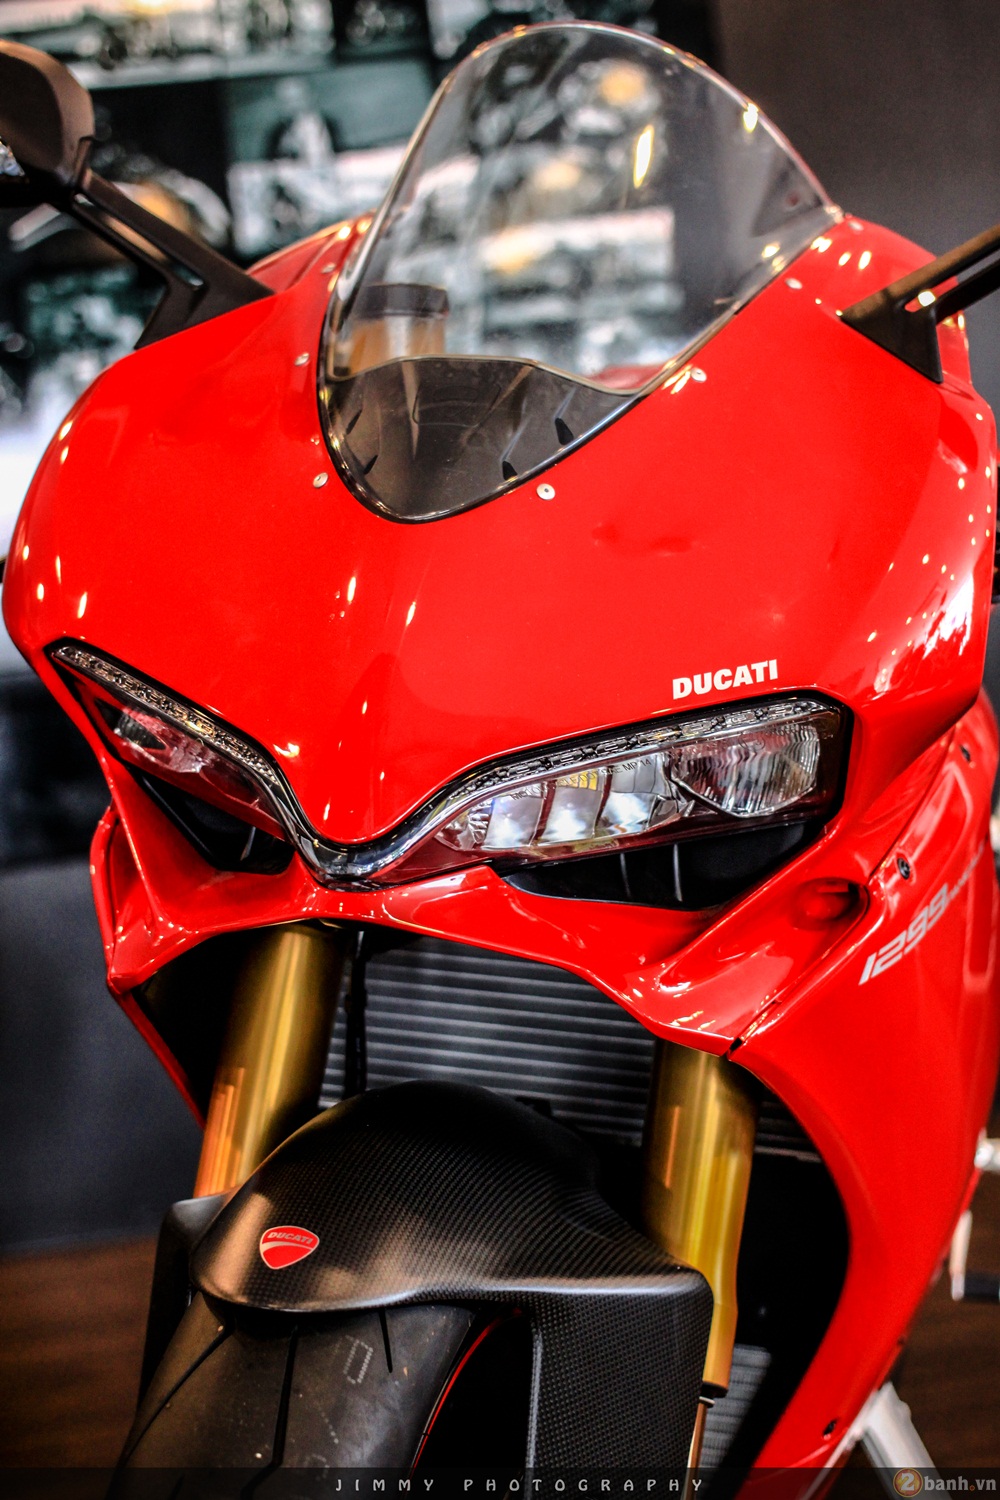 Chan dai Italy 1299 Panigale S chiec Super Sport gon nhe nhat hien nay - 9